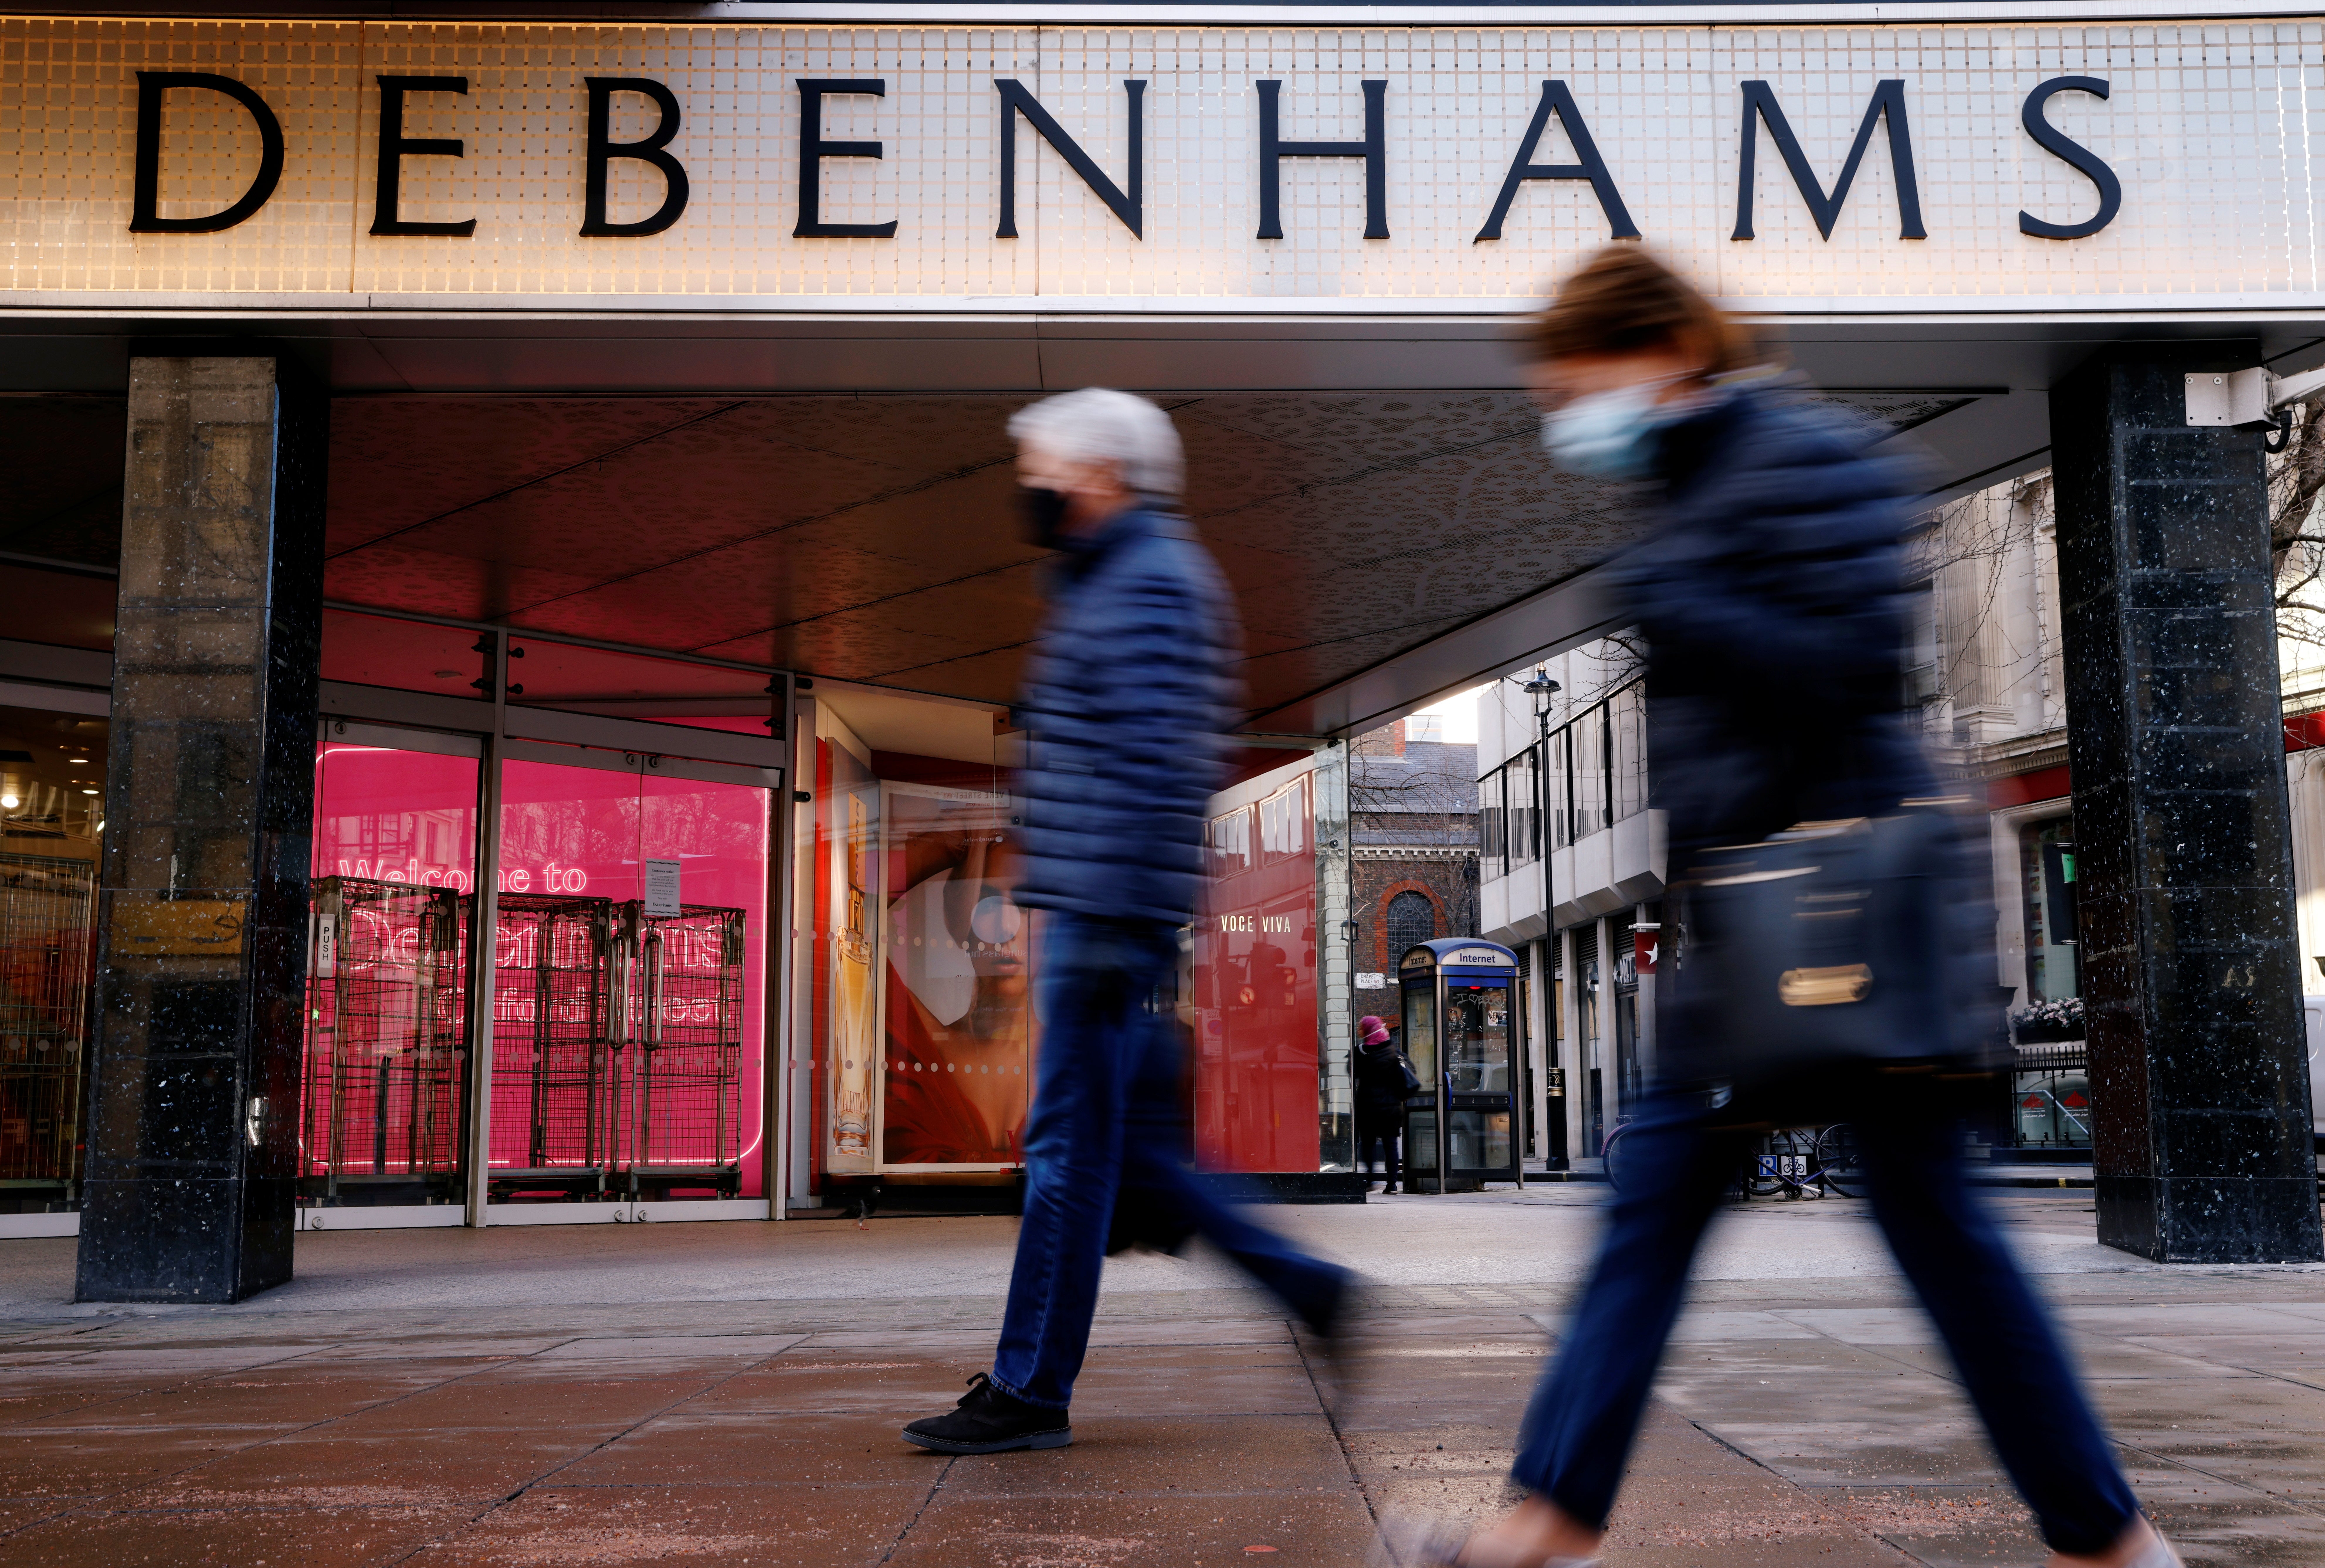 High streets that were doing well will continue to do well